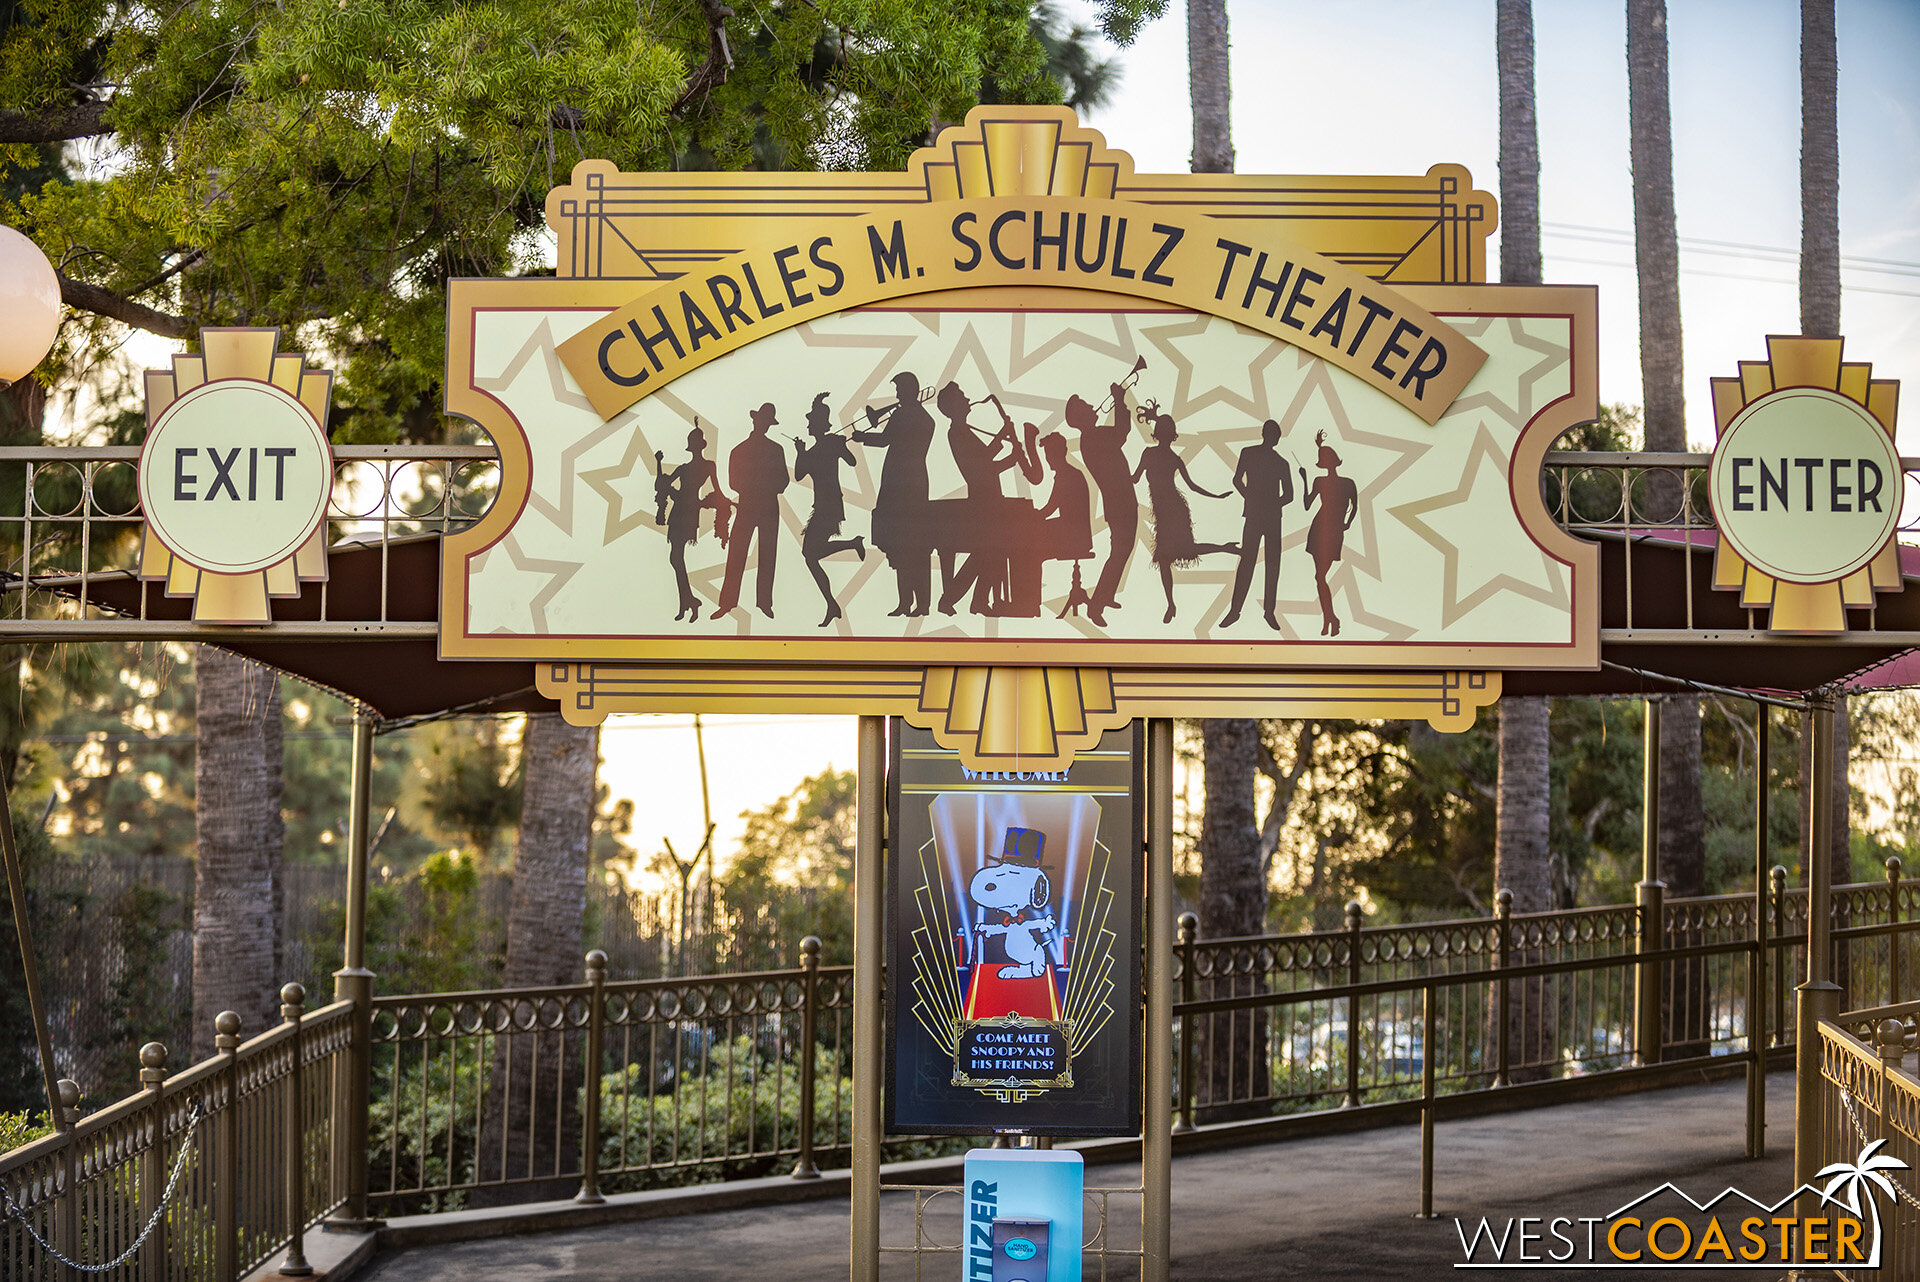  The Charles M. Schulz Theater has a new look too, evoking more of a glitz and glamor of the Golden Age of Hollywood and following more of the old Roaring 20’s roots of this part of the park. 